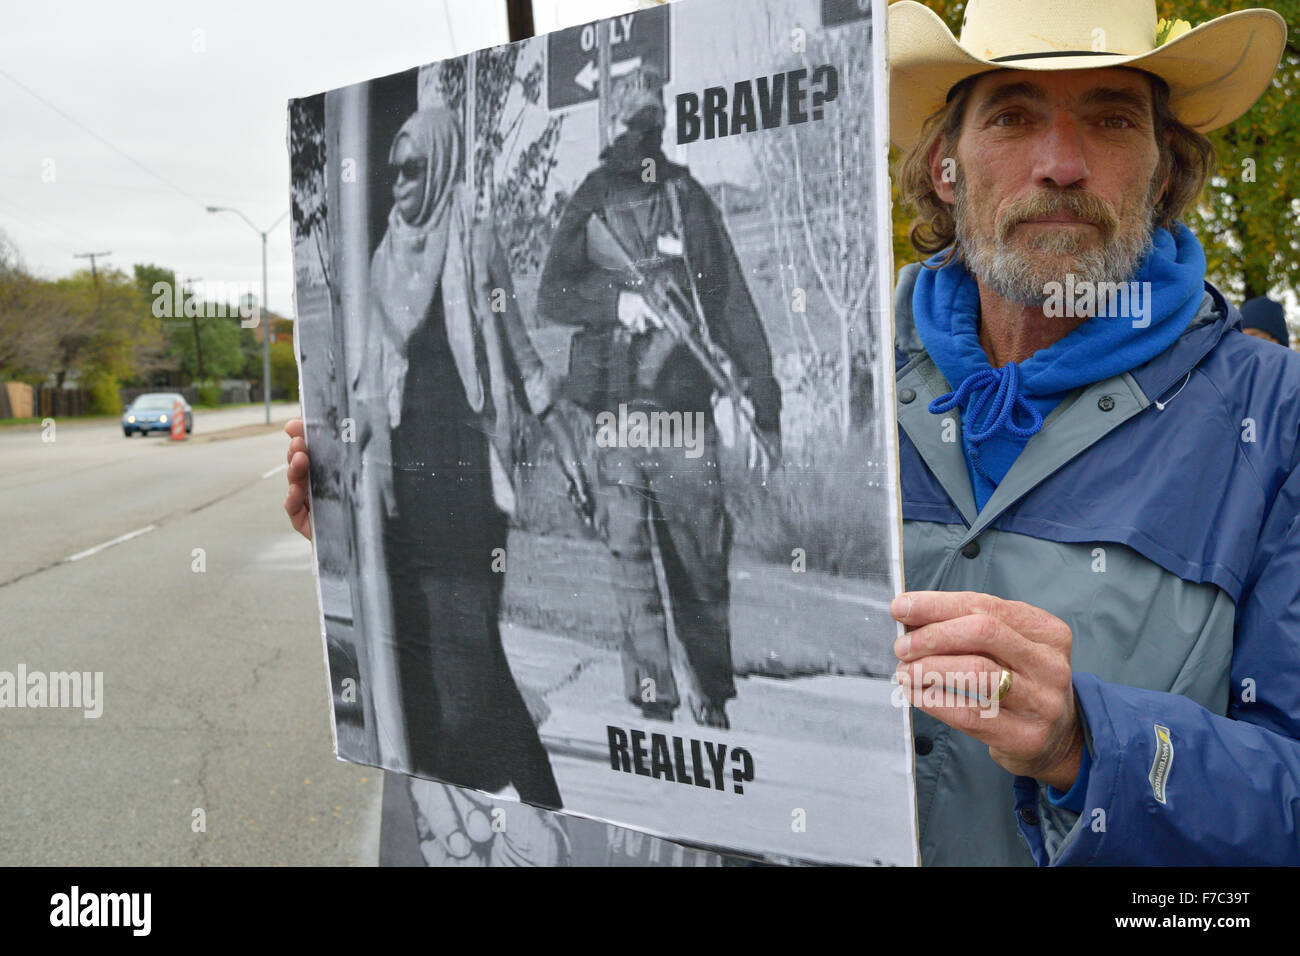 Irving, Texas, USA. 28th Nov, 2015. Man wearing cowboy hat rallies outside a mosque in Irving, TX  one week after armed men held a similar but lesser attended protest. Credit:  Brian Humek/Alamy Live News Stock Photo